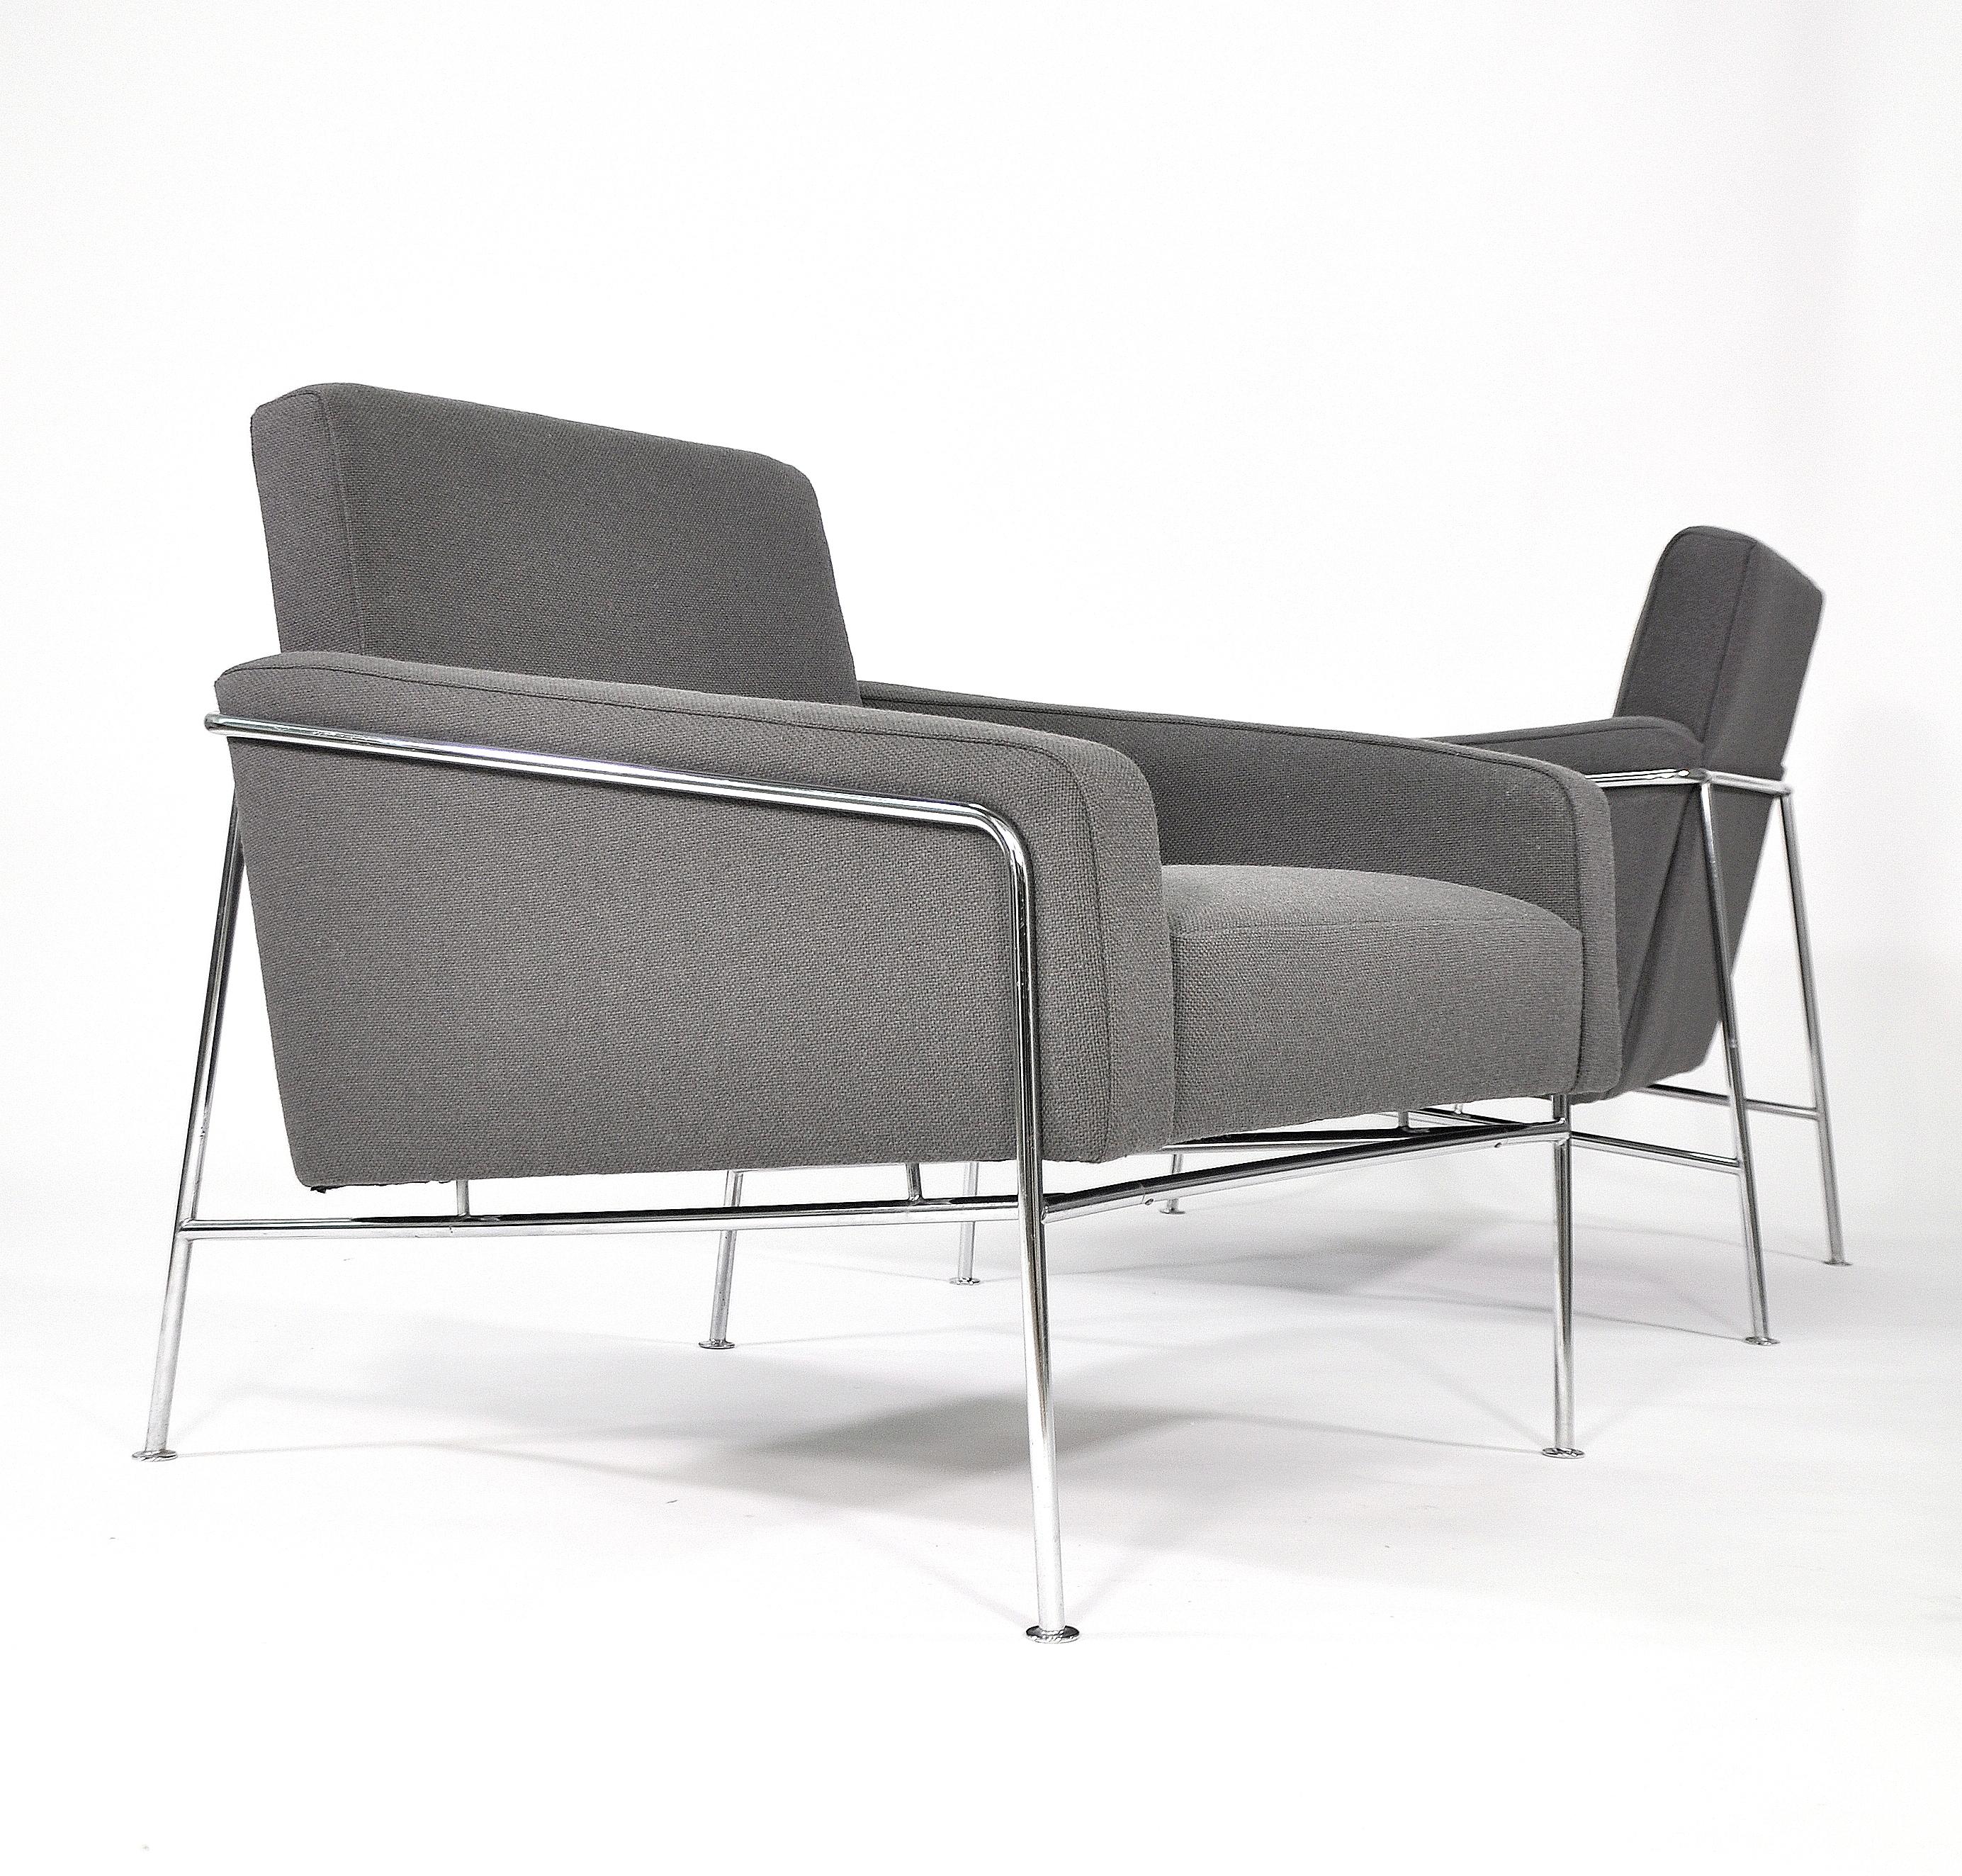 Fabric Pair of Arne Jacobsen for Fritz Hansen Series 3300 Gray Lounge Chairs